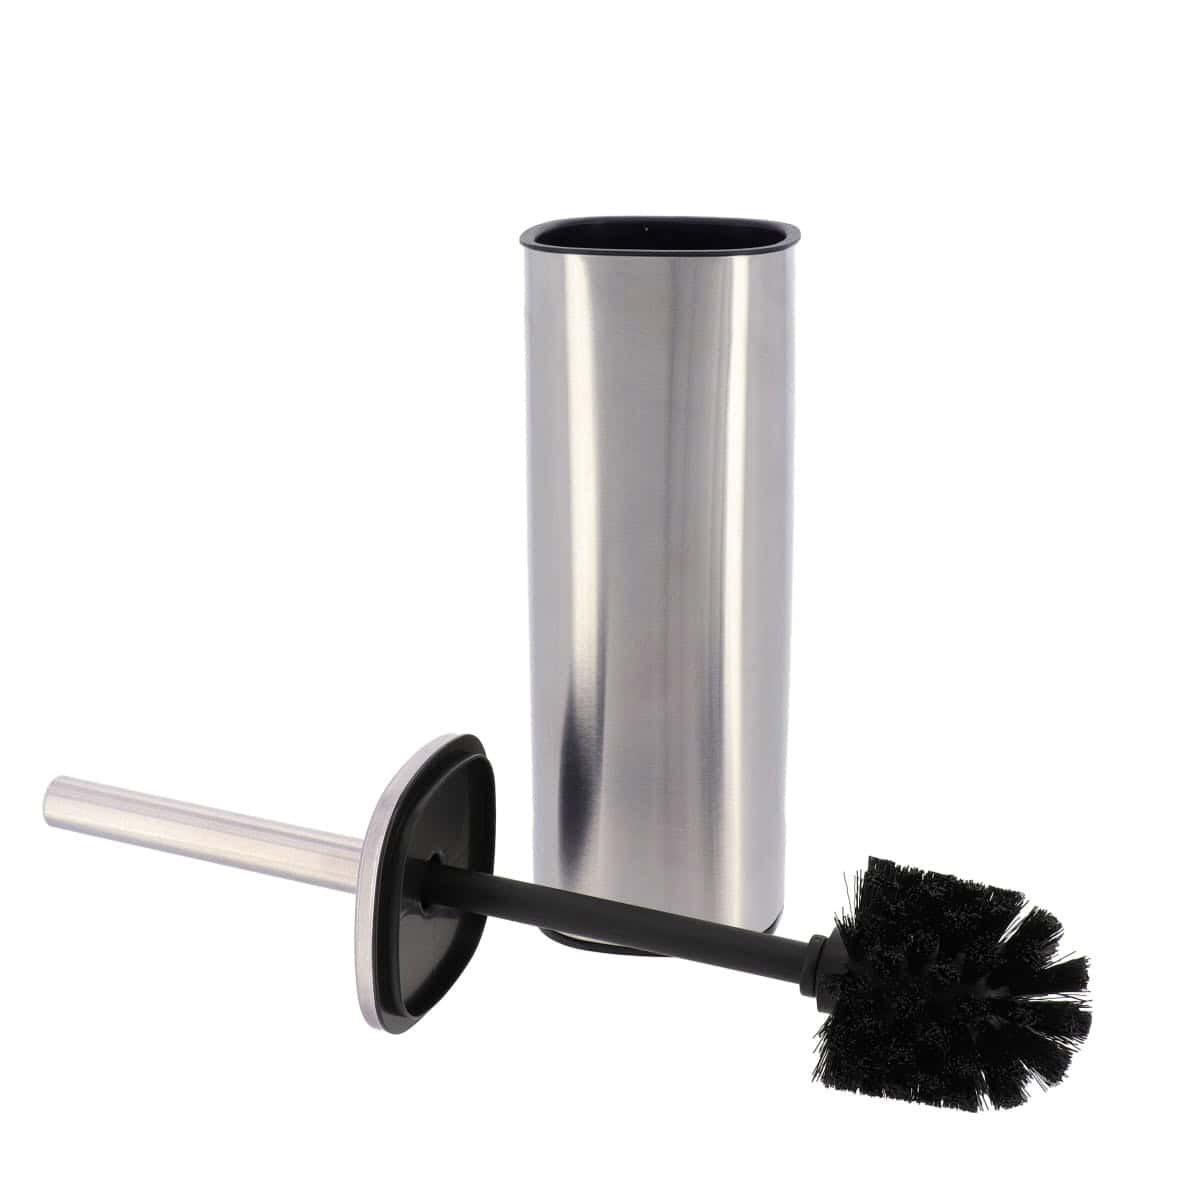 a chrome metal toilet brush and holder with chrome handle and black brush